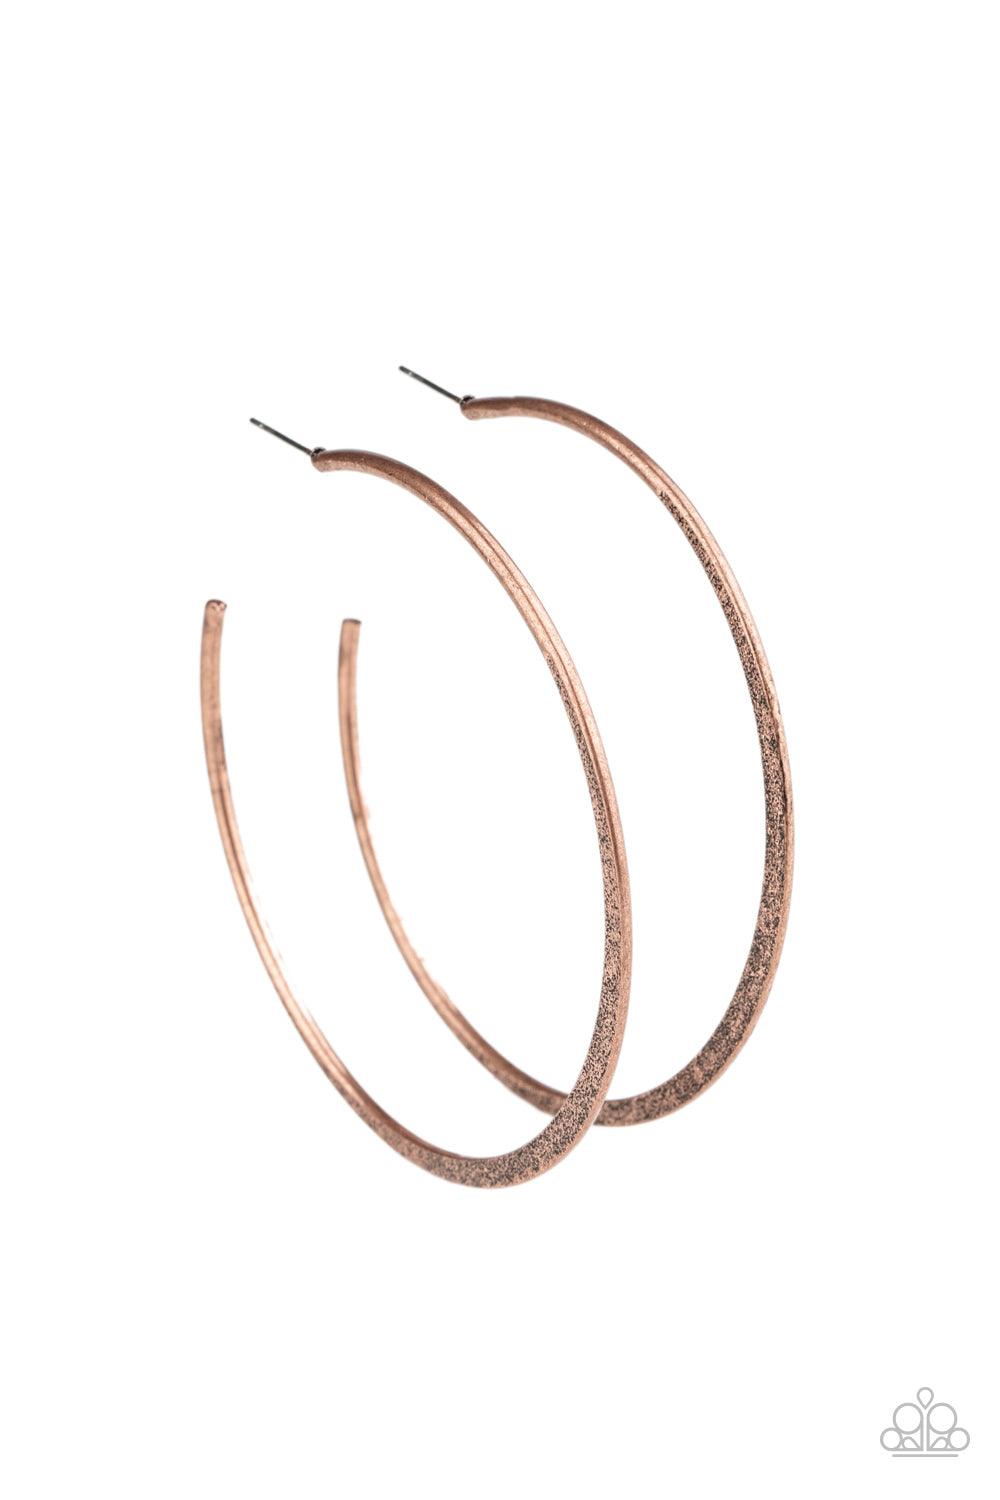 Paparazzi Accessories Flat Spin - Copper The bottom of an oversized copper hoop is flattened and hammered in shimmery rustic textures for a glistening finish. Earring attaches to a standard post fitting. Hoop measures approximately 2 3/4" in diameter. Sol